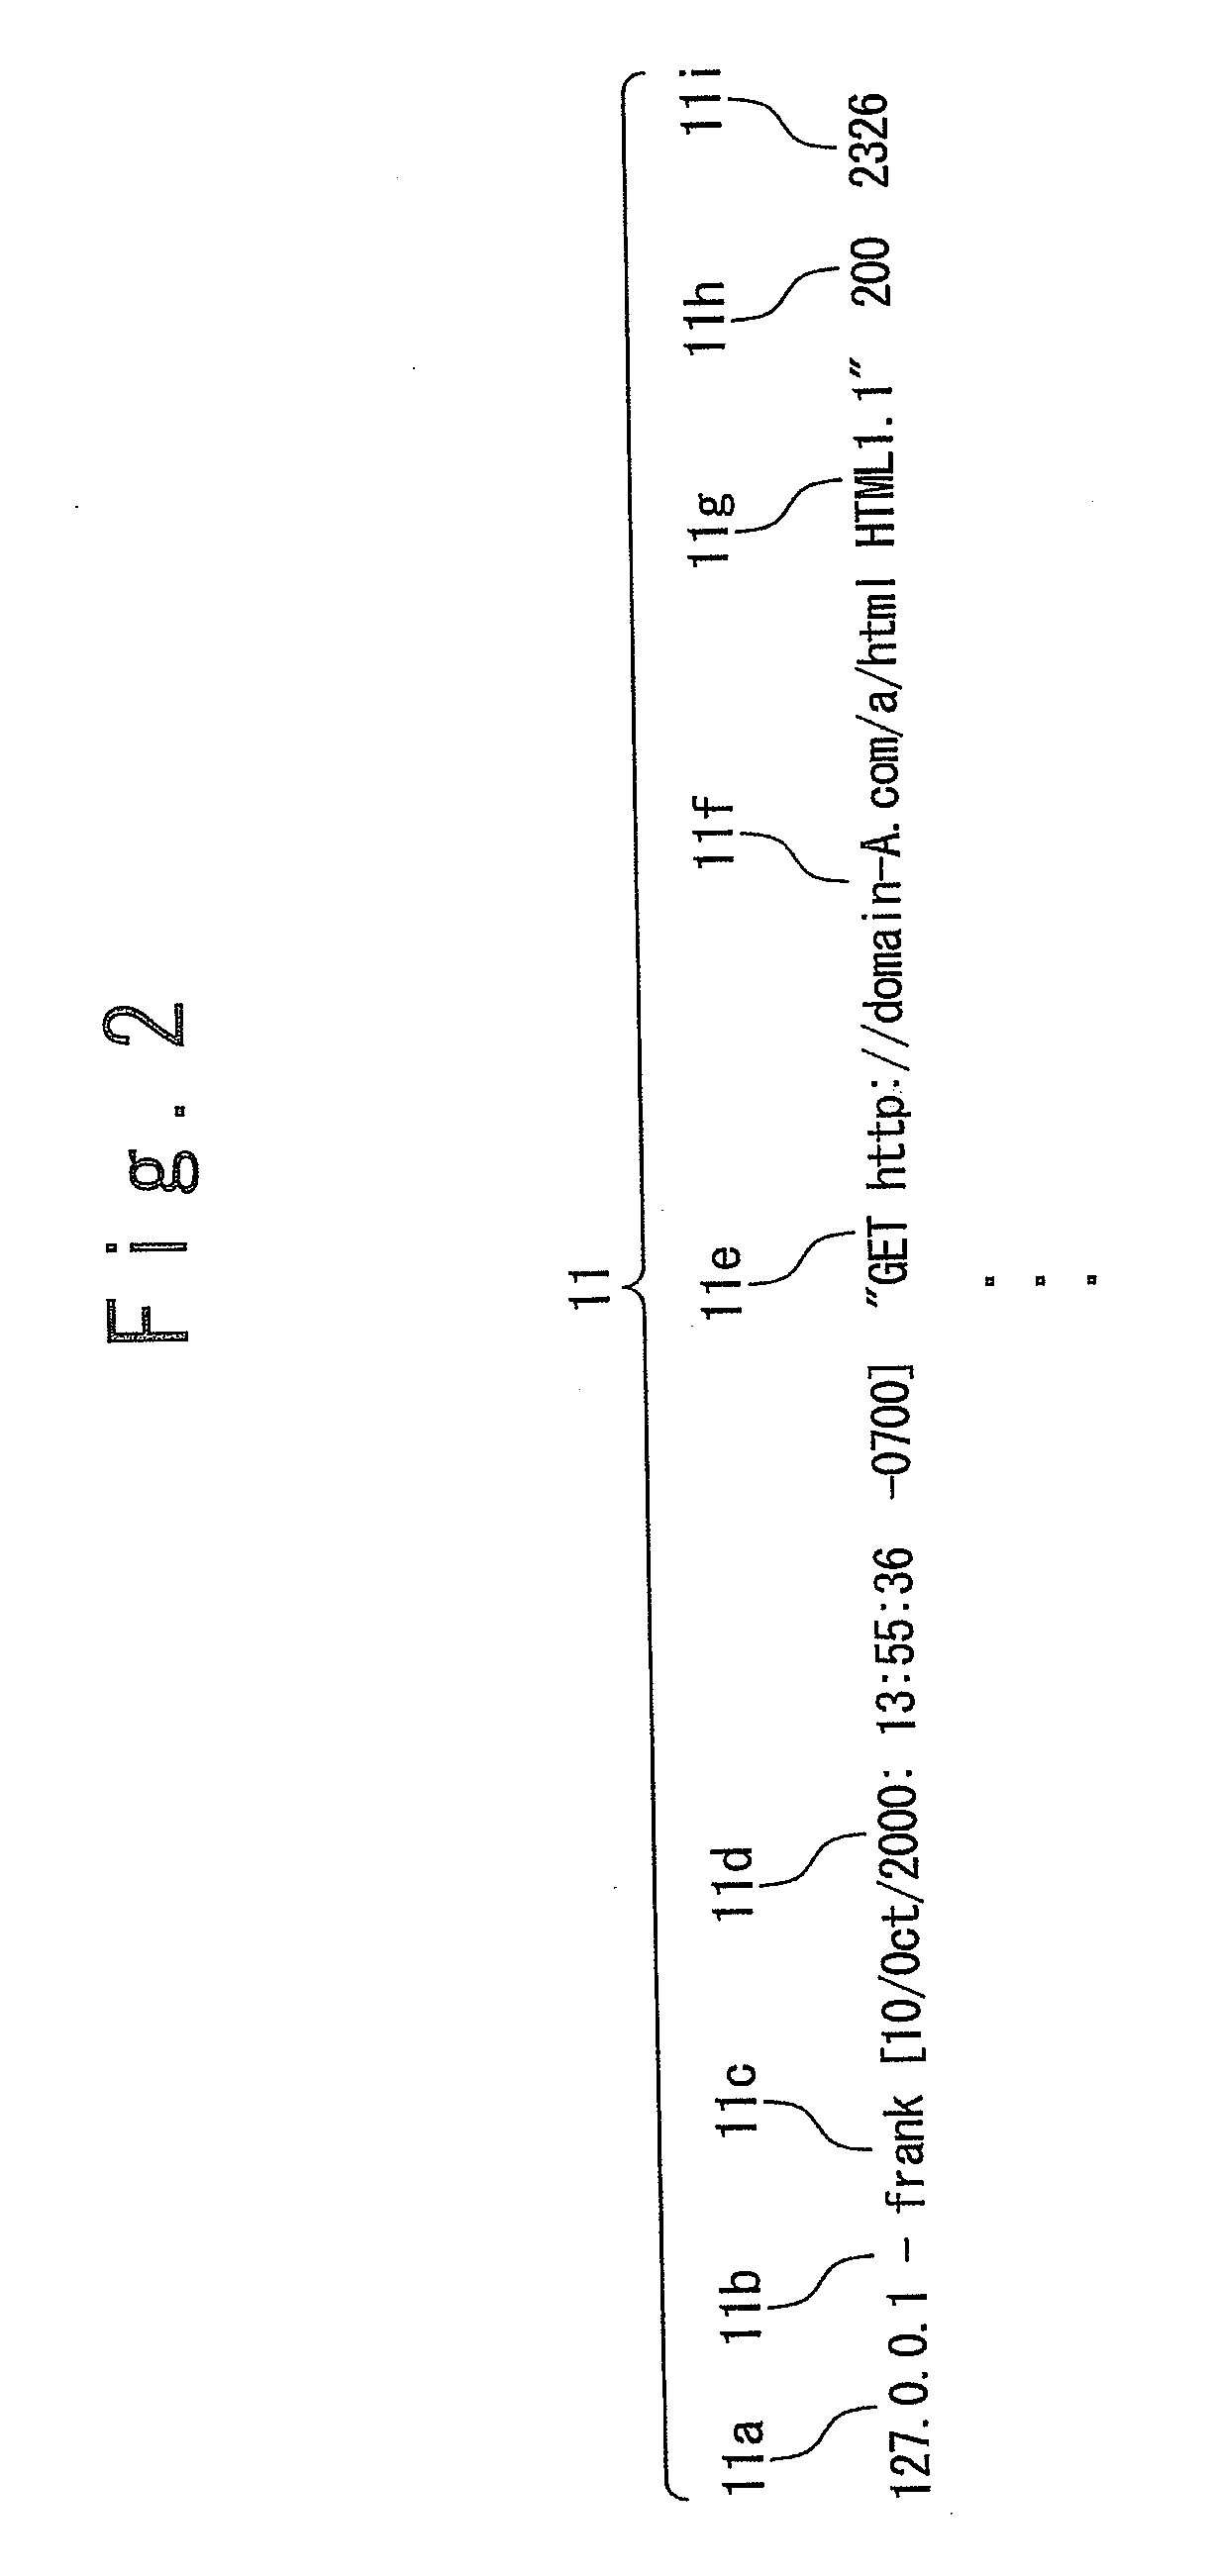 Management apparatus and management method for computer system